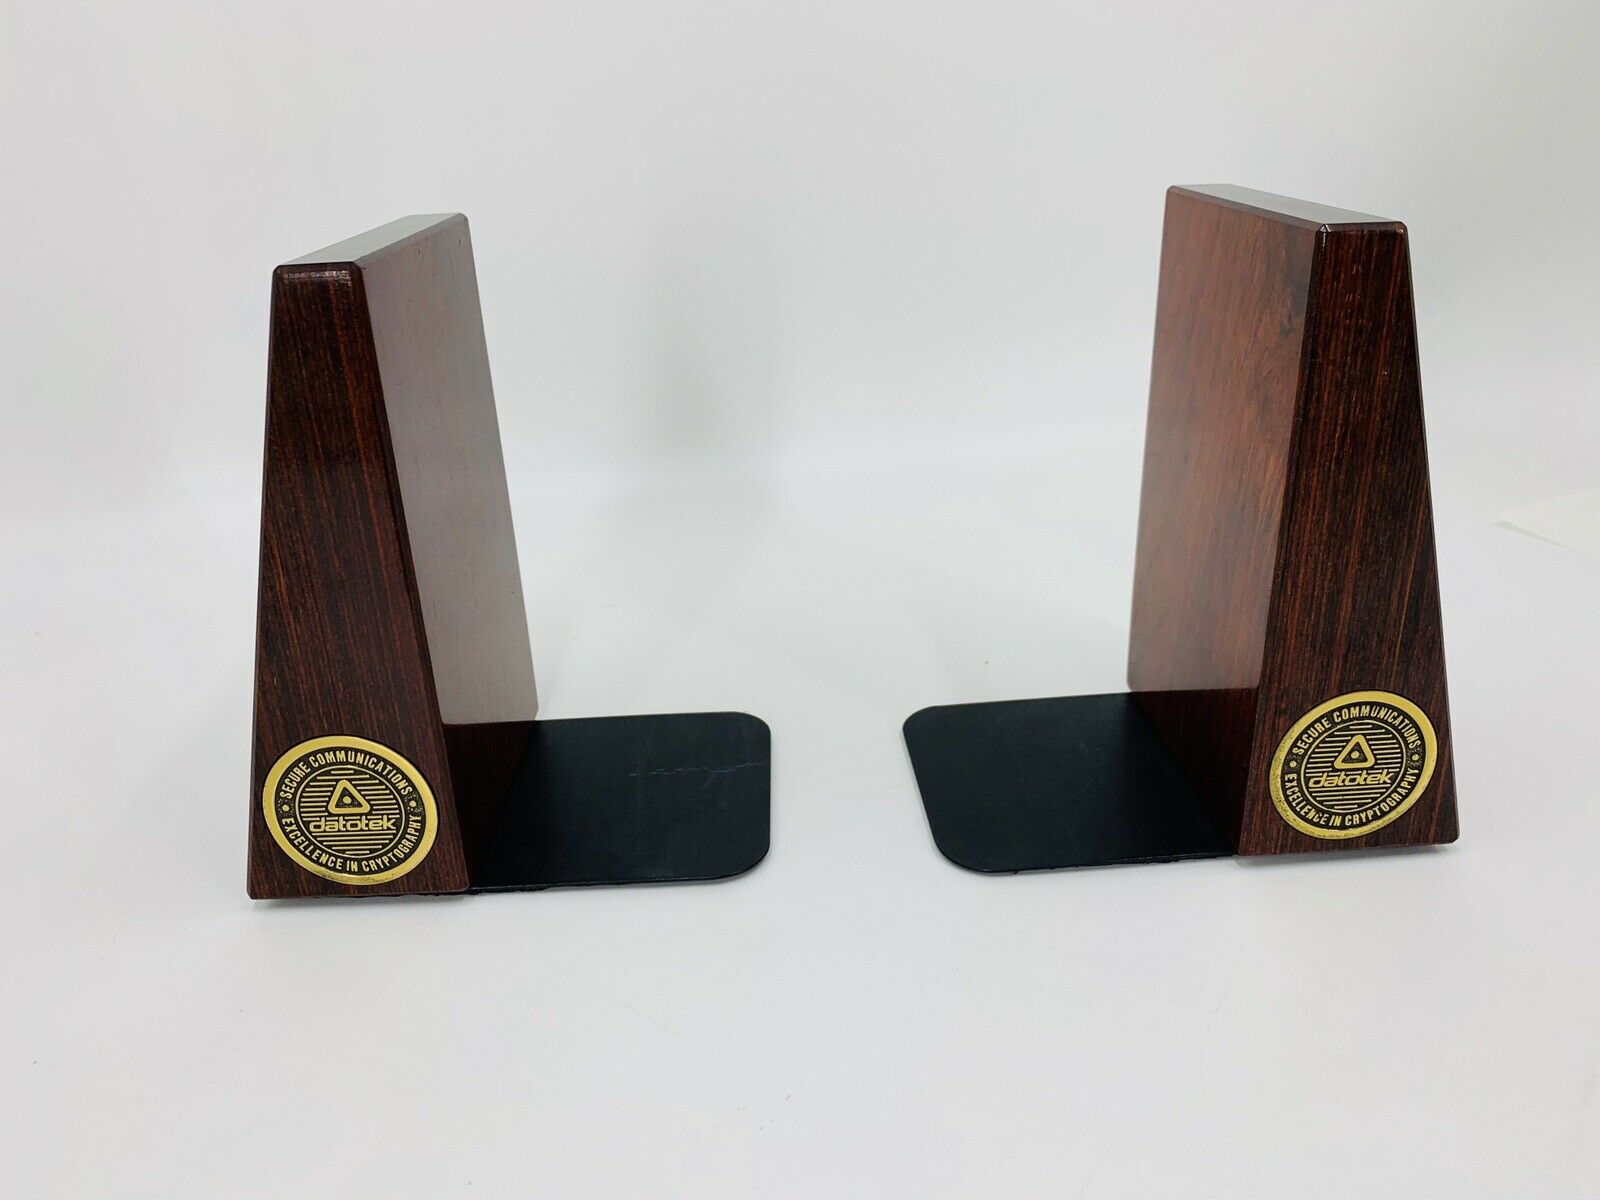 Datotek Book Ends (American made by BTS Group)